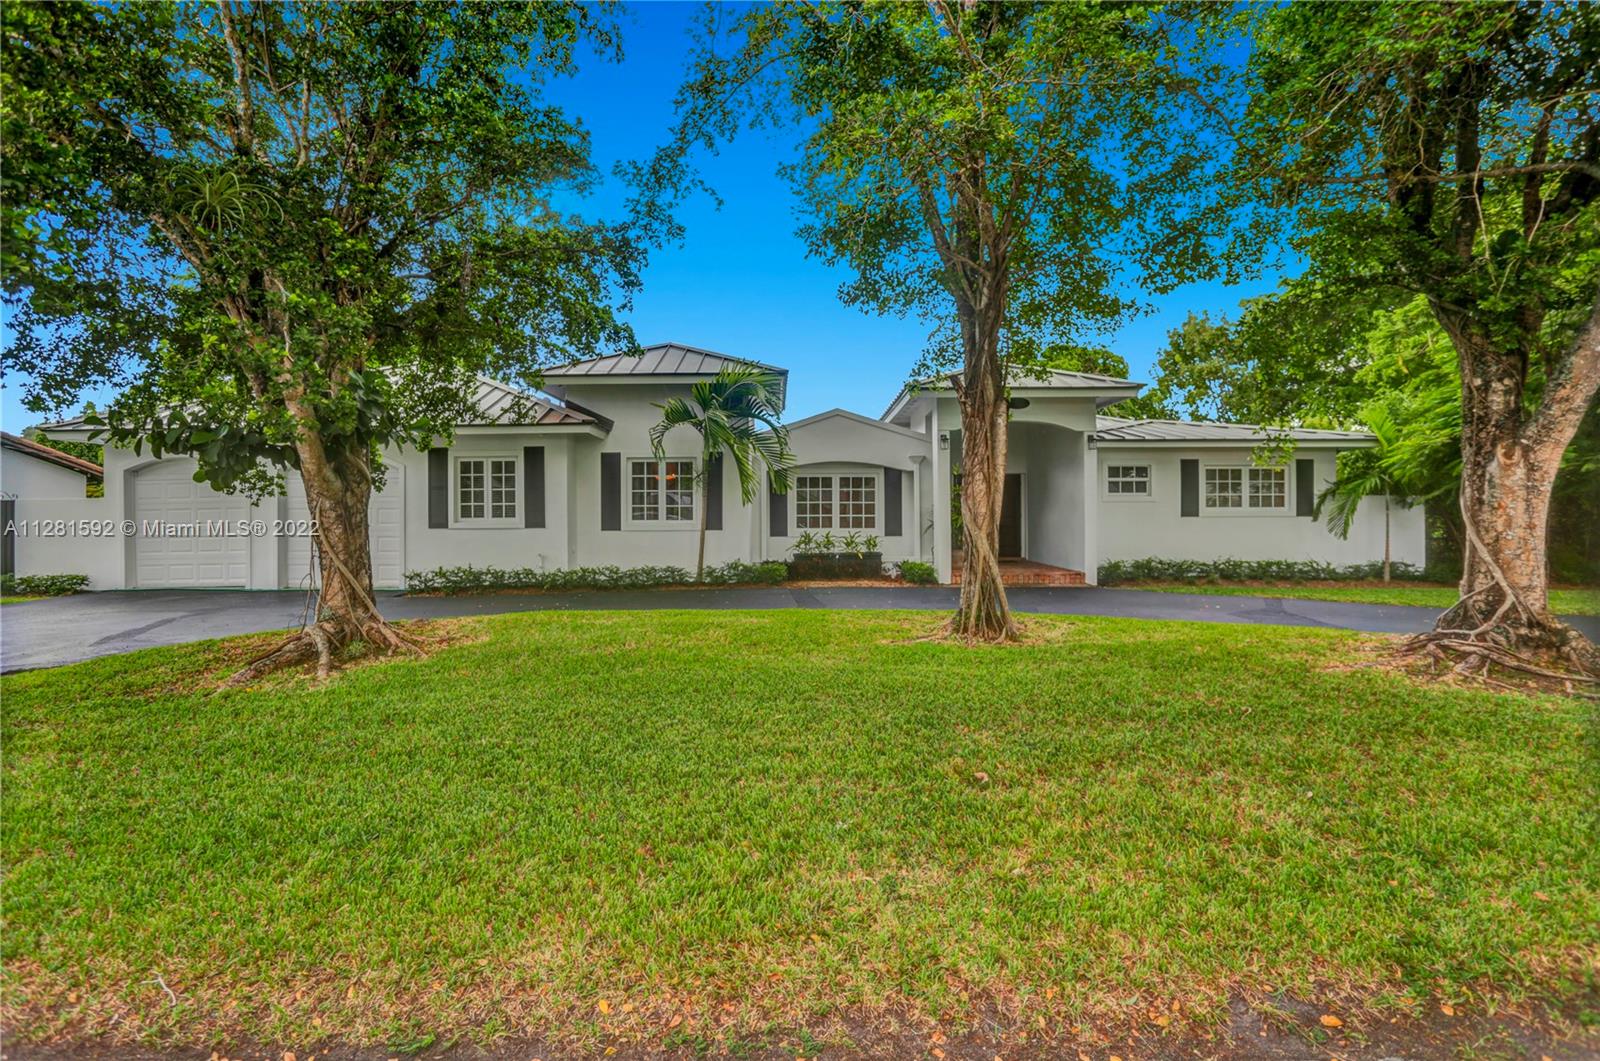 Drive down the tree-lined street in a prime section of Pinecrest to this beautiful home. This home has a wonderful floor plan with the kitchen open to the large family room.  The family room has high, vaulted ceilings. There are lovely architectural details in the interior.   The backyard is very private and features a large patio and a large, covered area that would be perfect for an outdoor kitchen.  There is a sparkling pool and room to park a boat.